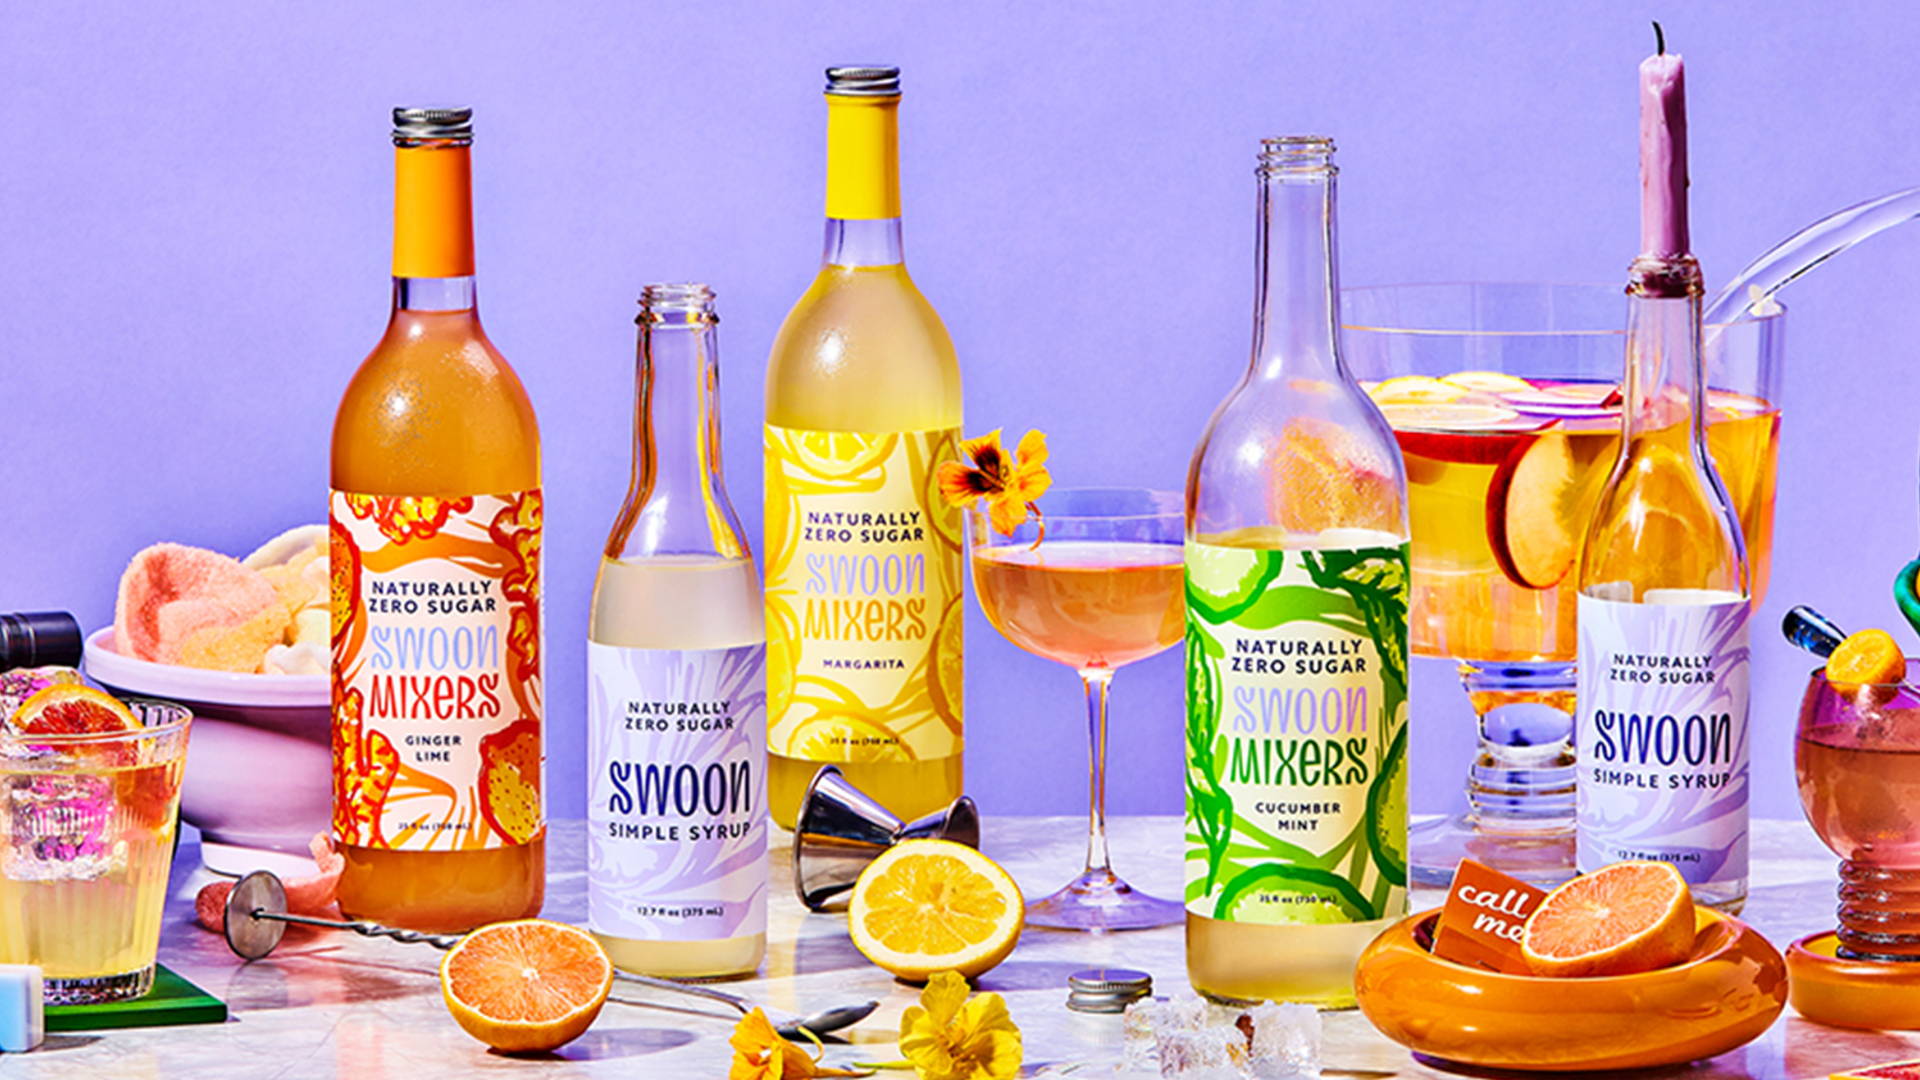 swoon mixers and syrups variety bundle